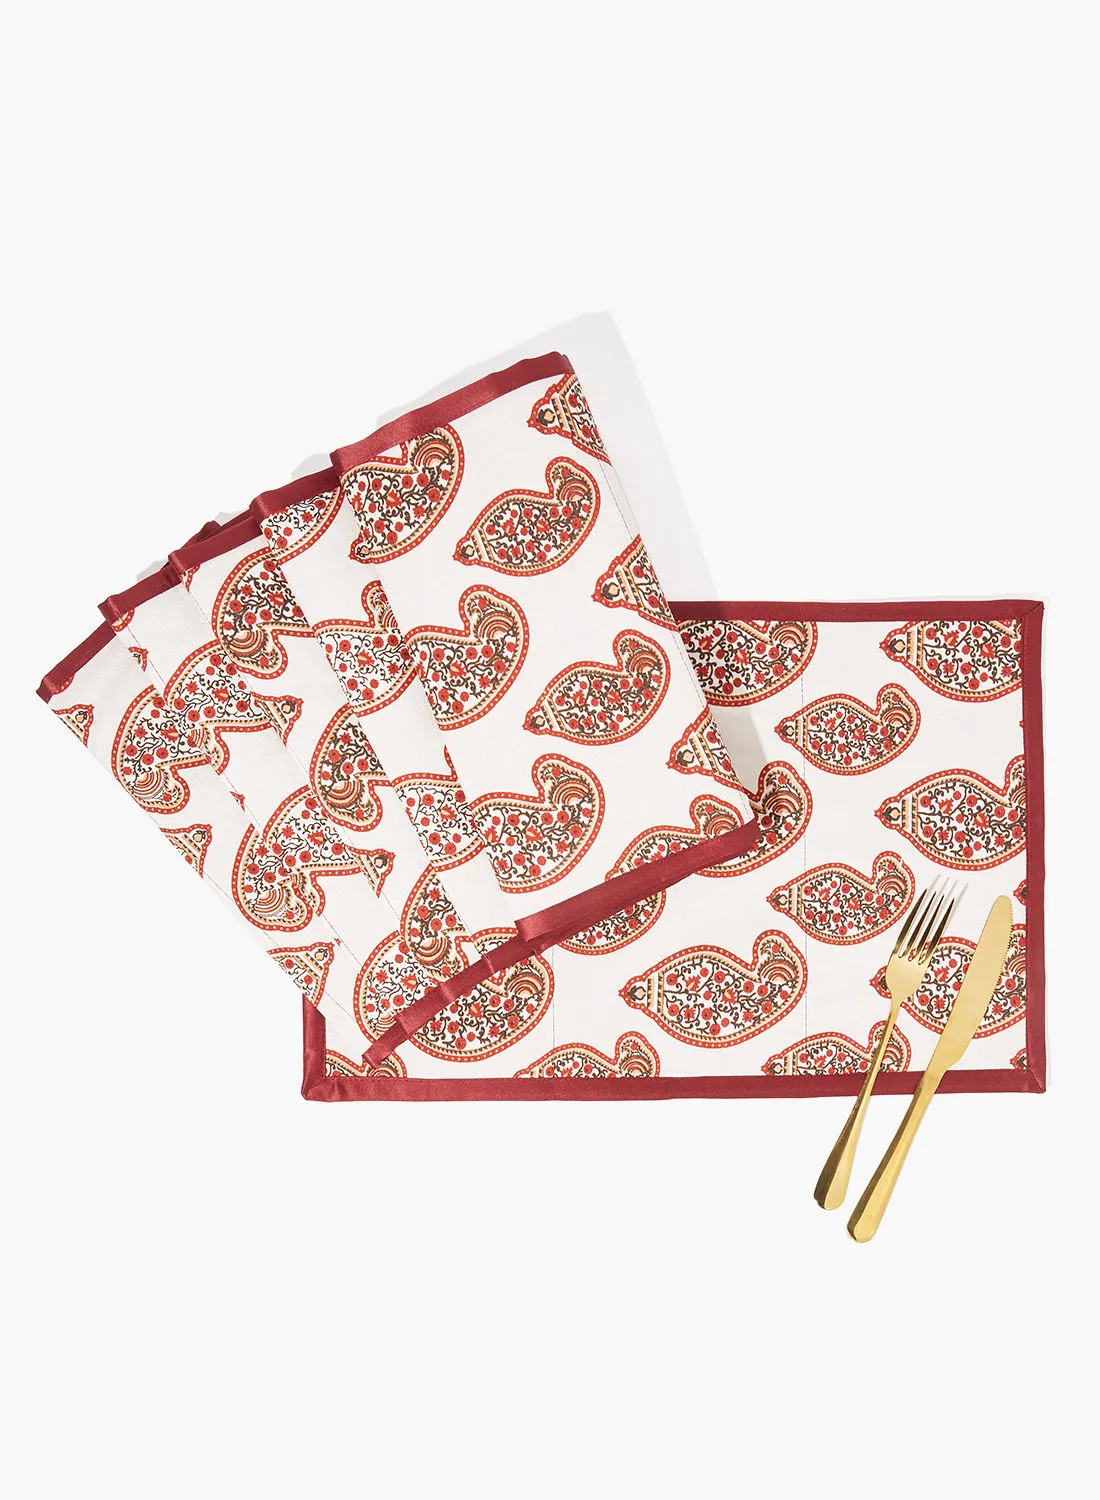 Amal 6 Piece Placemat Set For Dining Table - Washable Dish Pad - Table Mat - Table Linen - Maroon/White